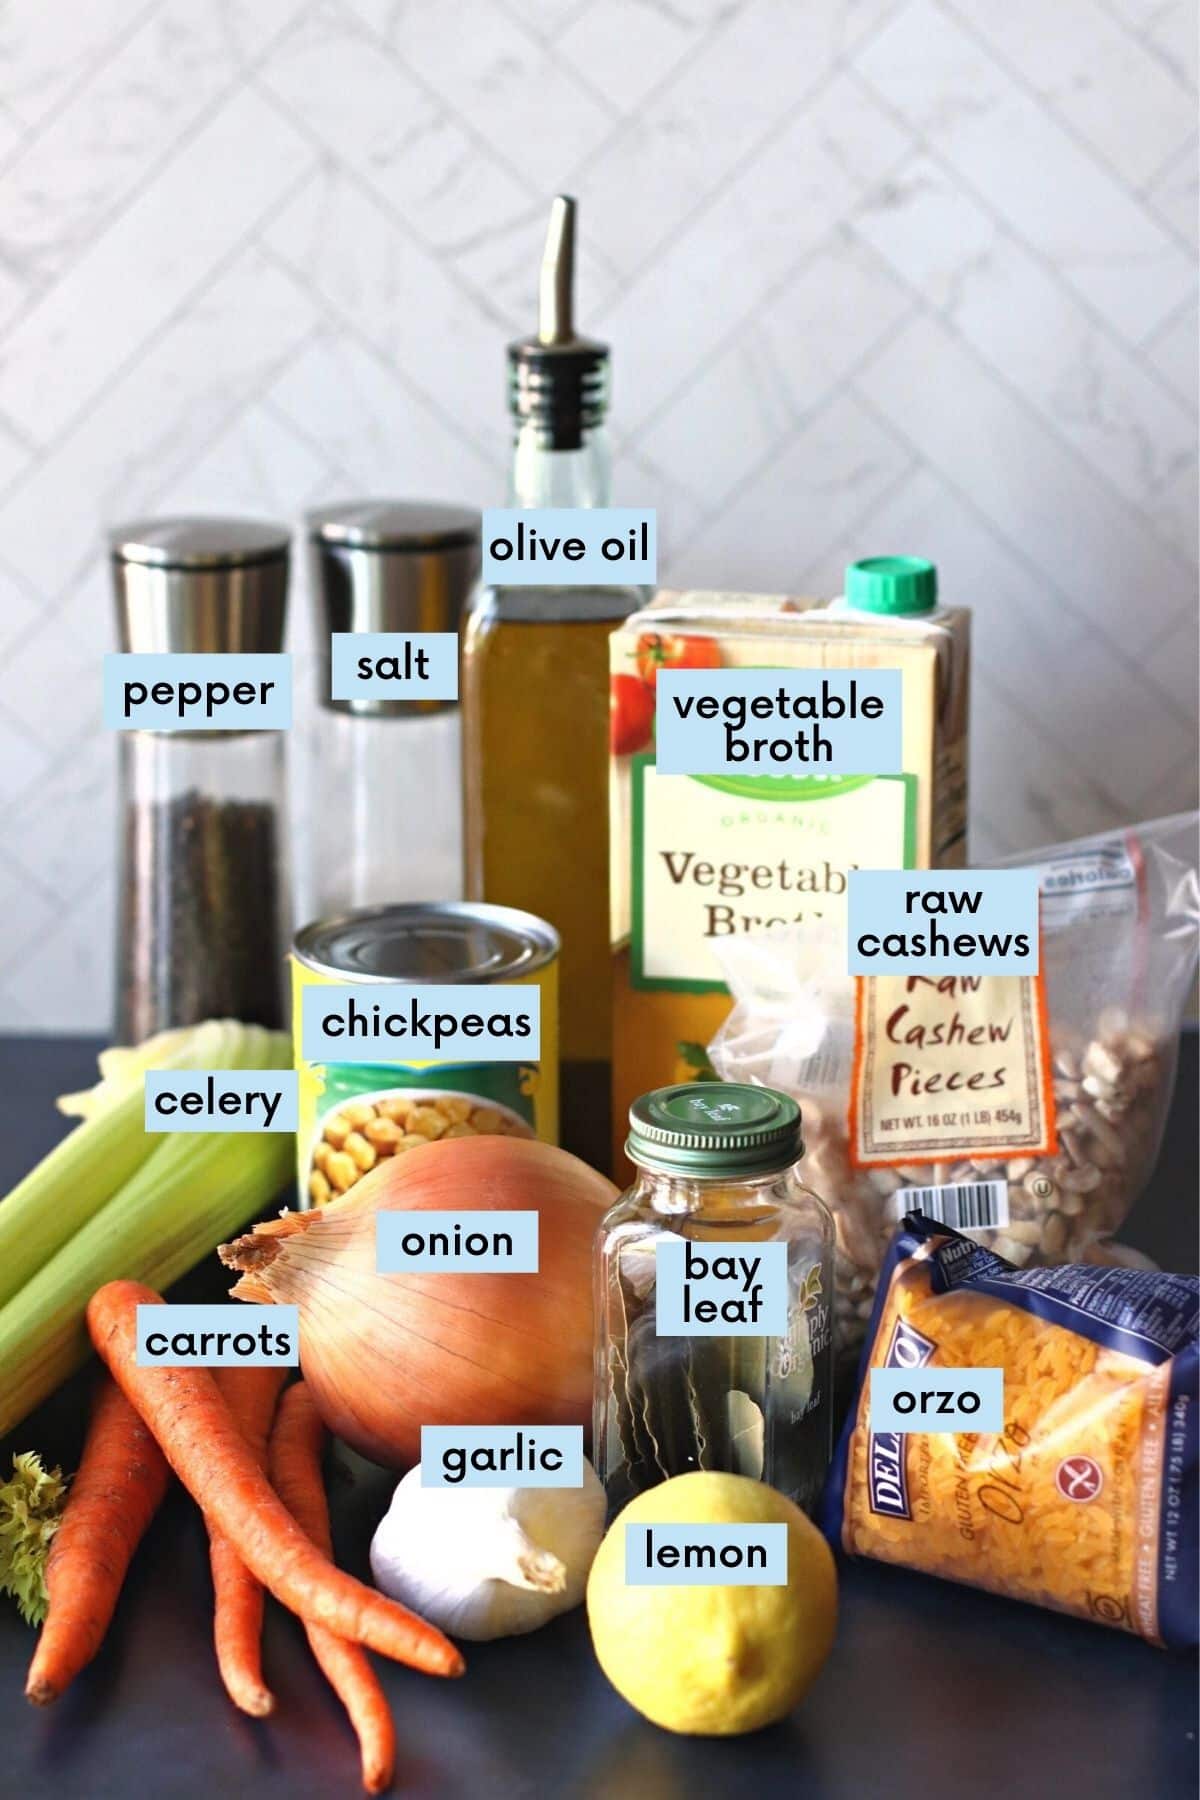 Labeled ingredients needed to make this recipe